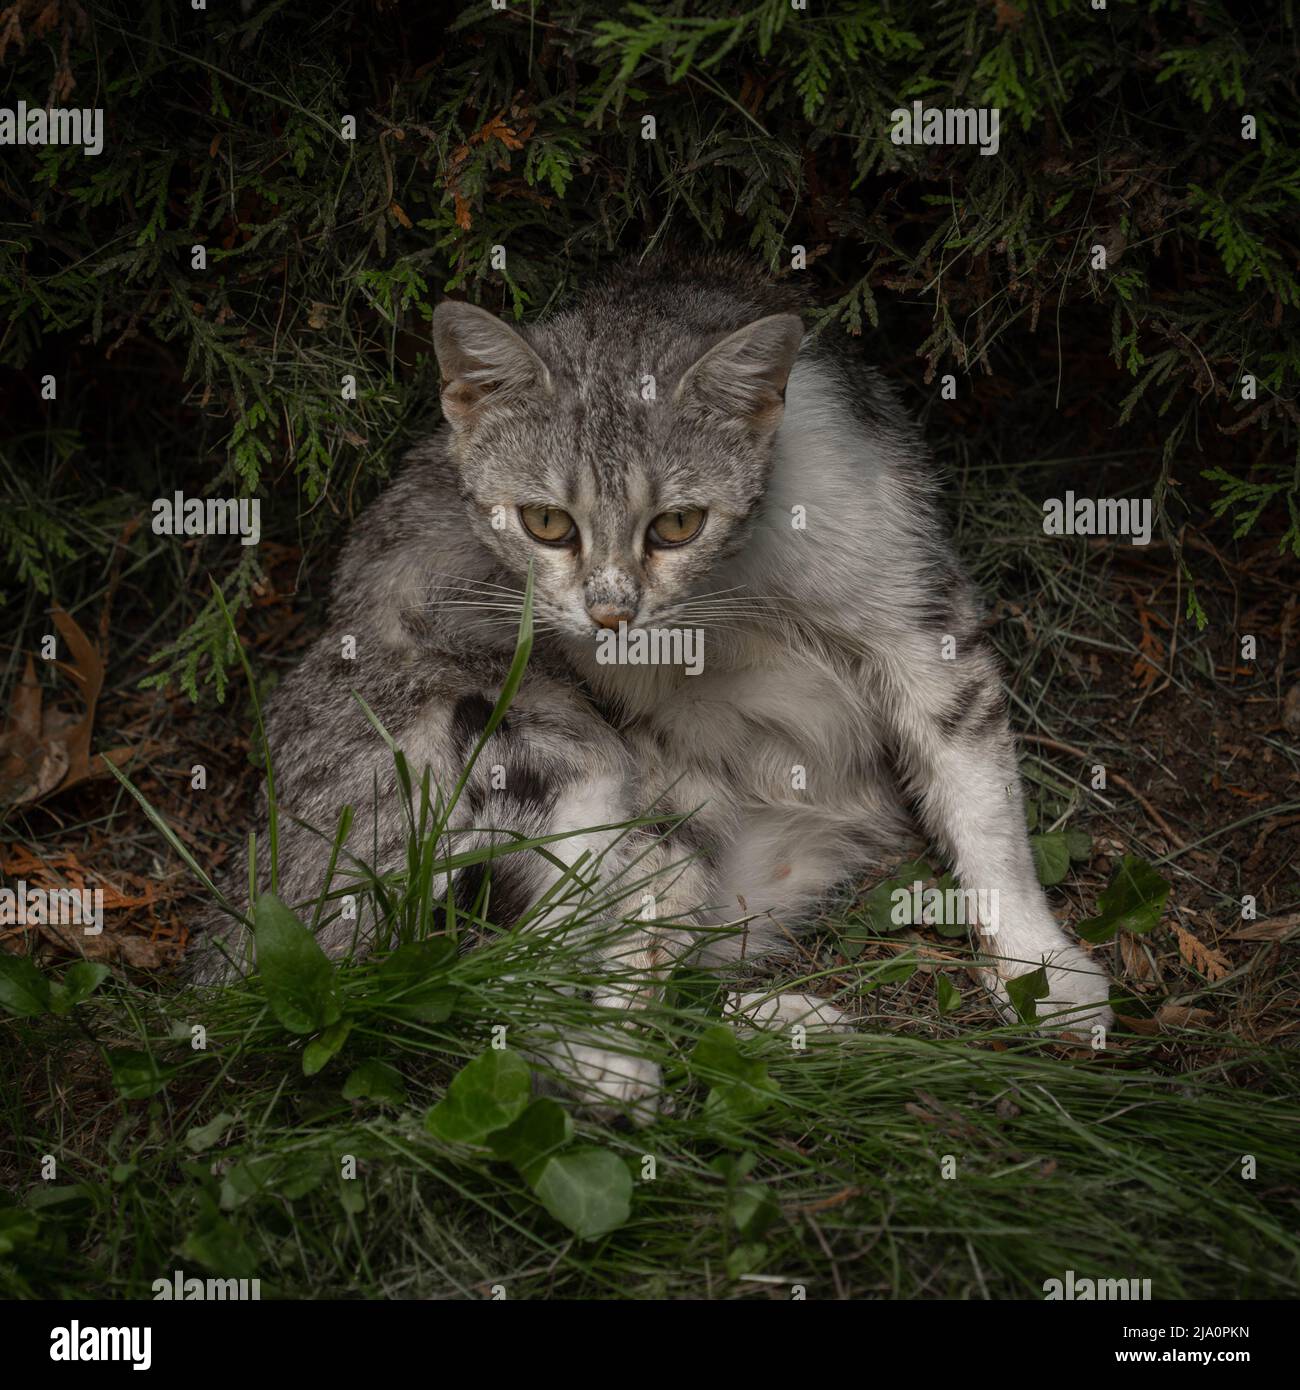 Sofia, Bulgaria - 24.05.2022, A tabby cat sits in the garden with the dark thuja bushes background. Stock Photo